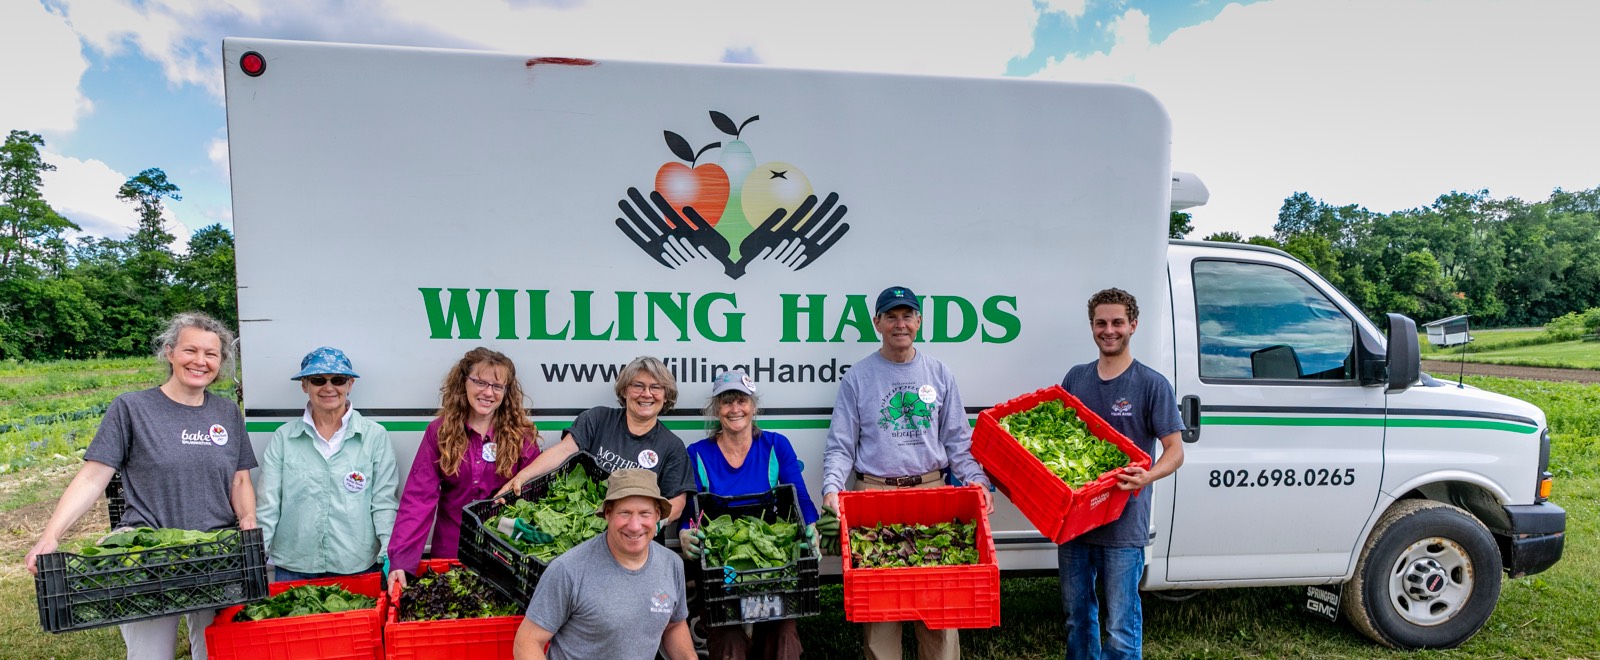 Volunteers with bins of gleaned vegetables in front of the Willing Hands truck